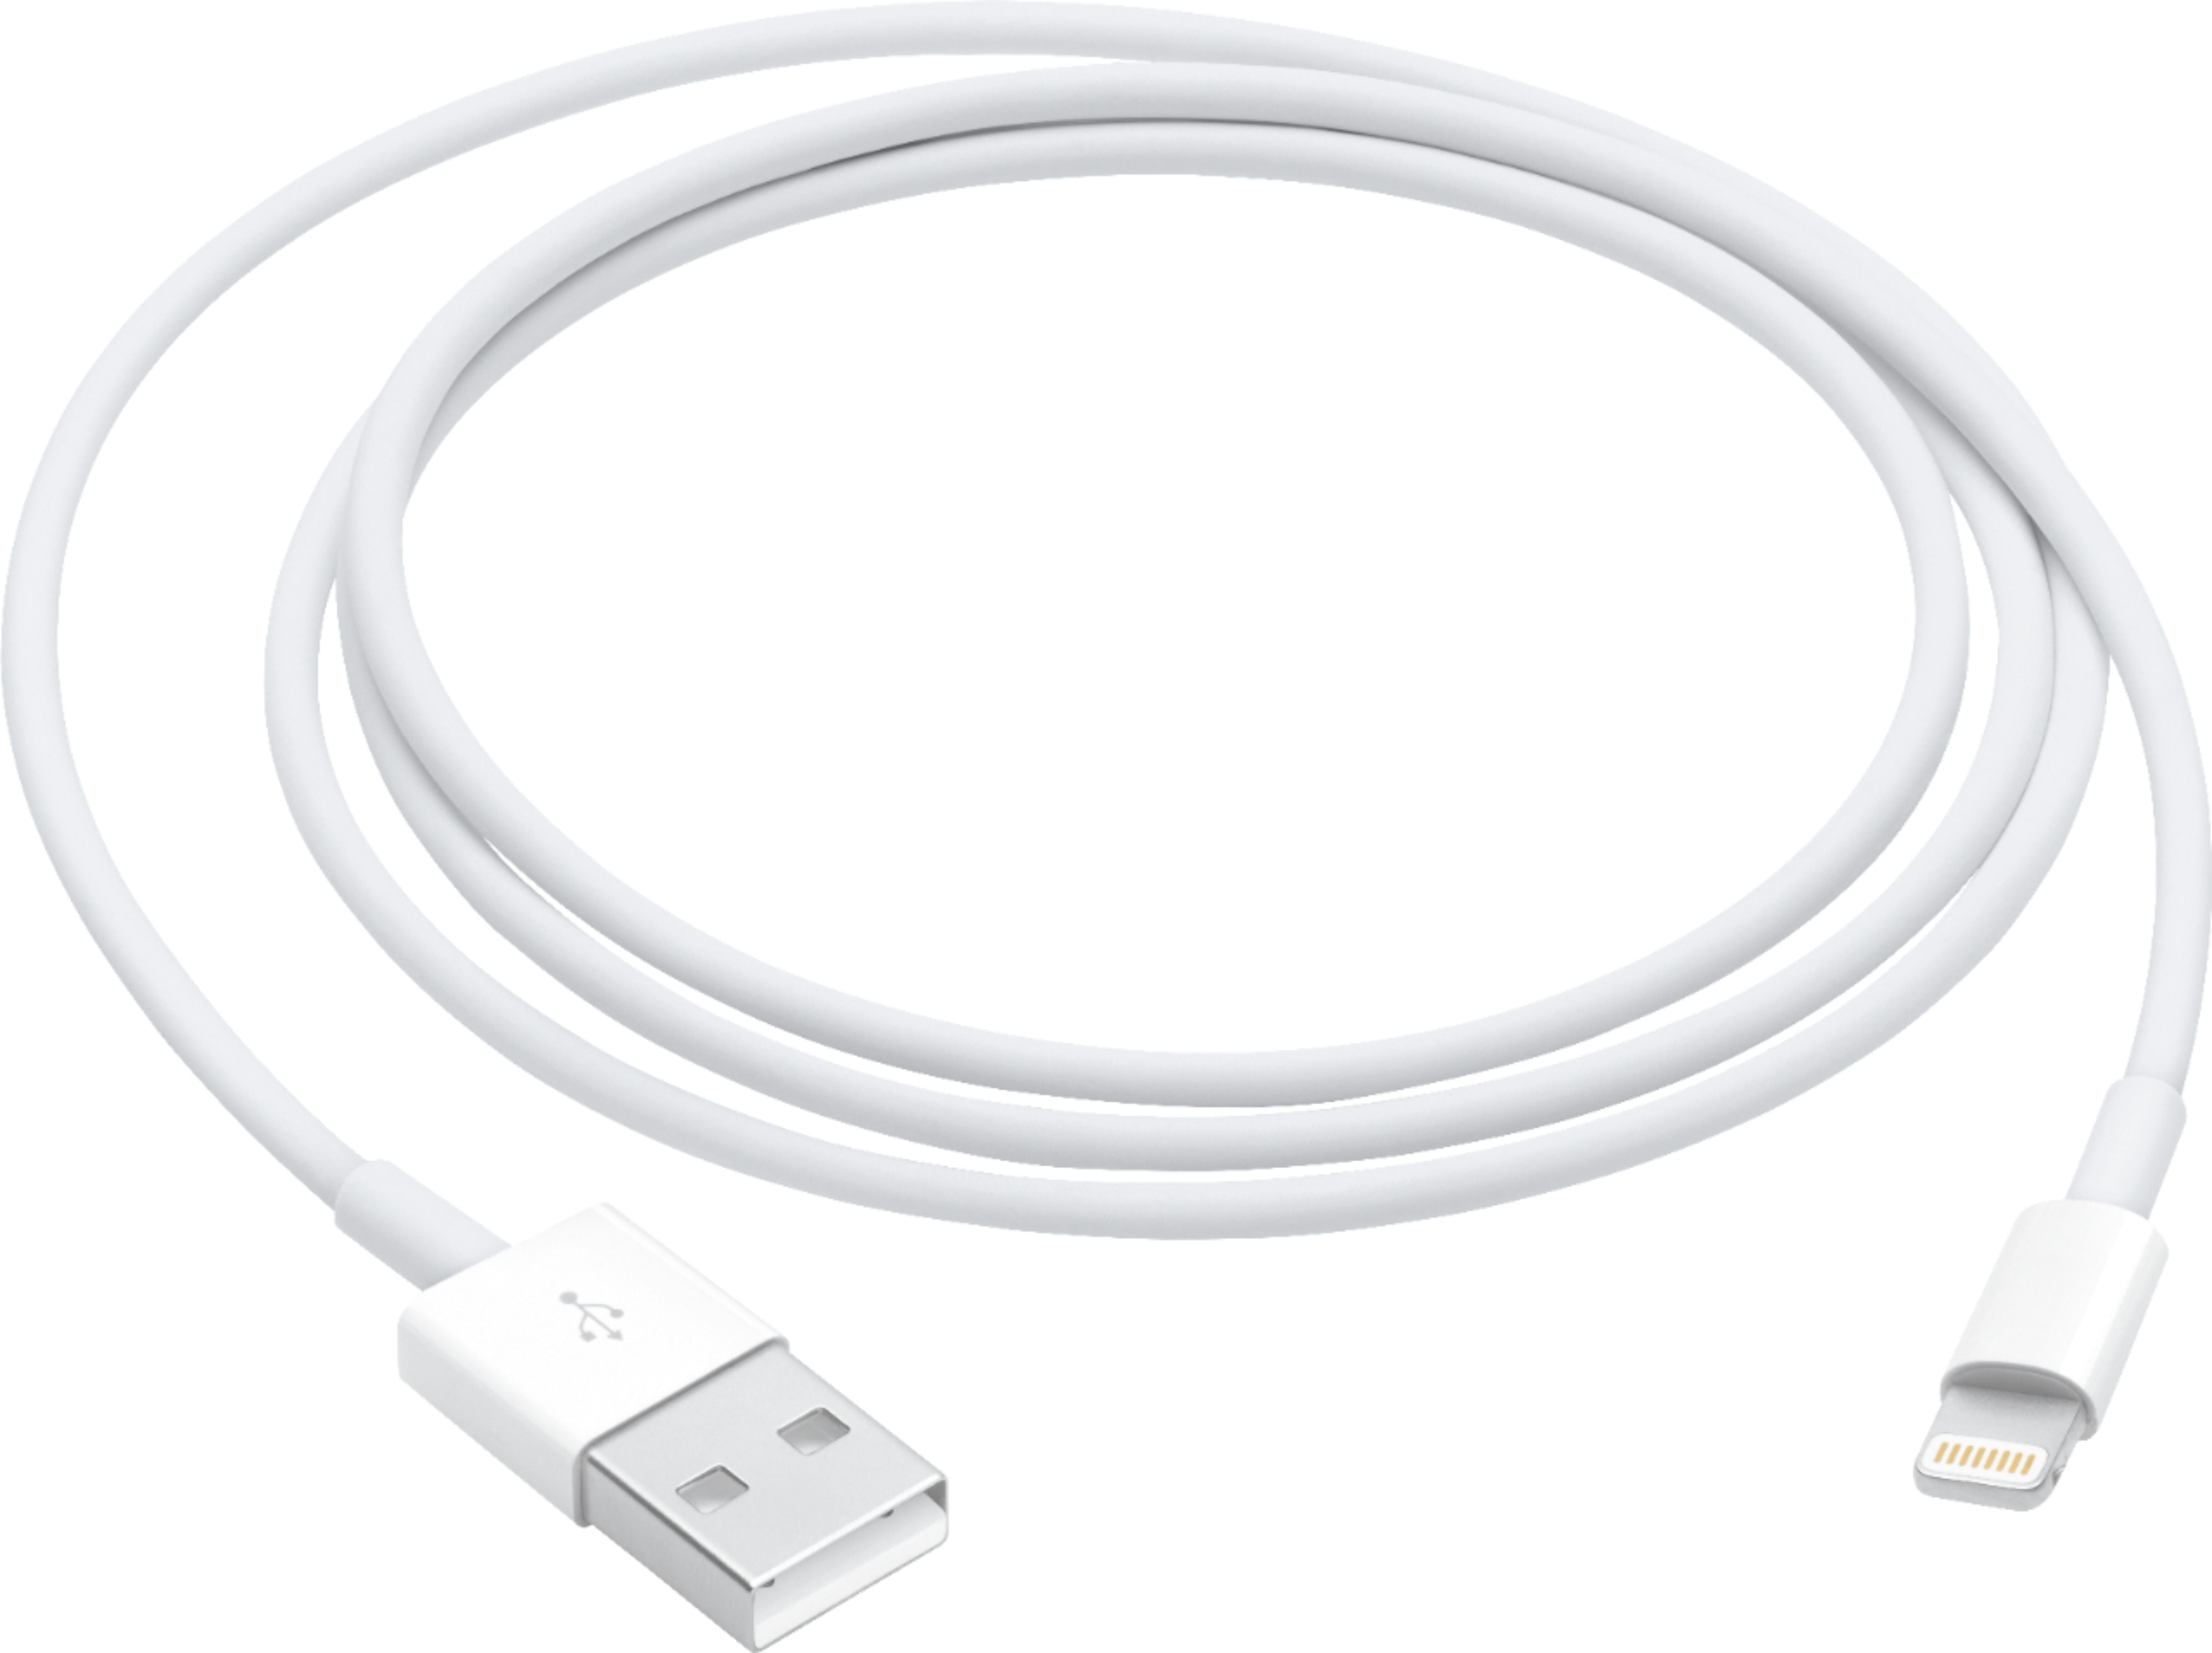 Apple iPhone Sync Charger Cable Cord